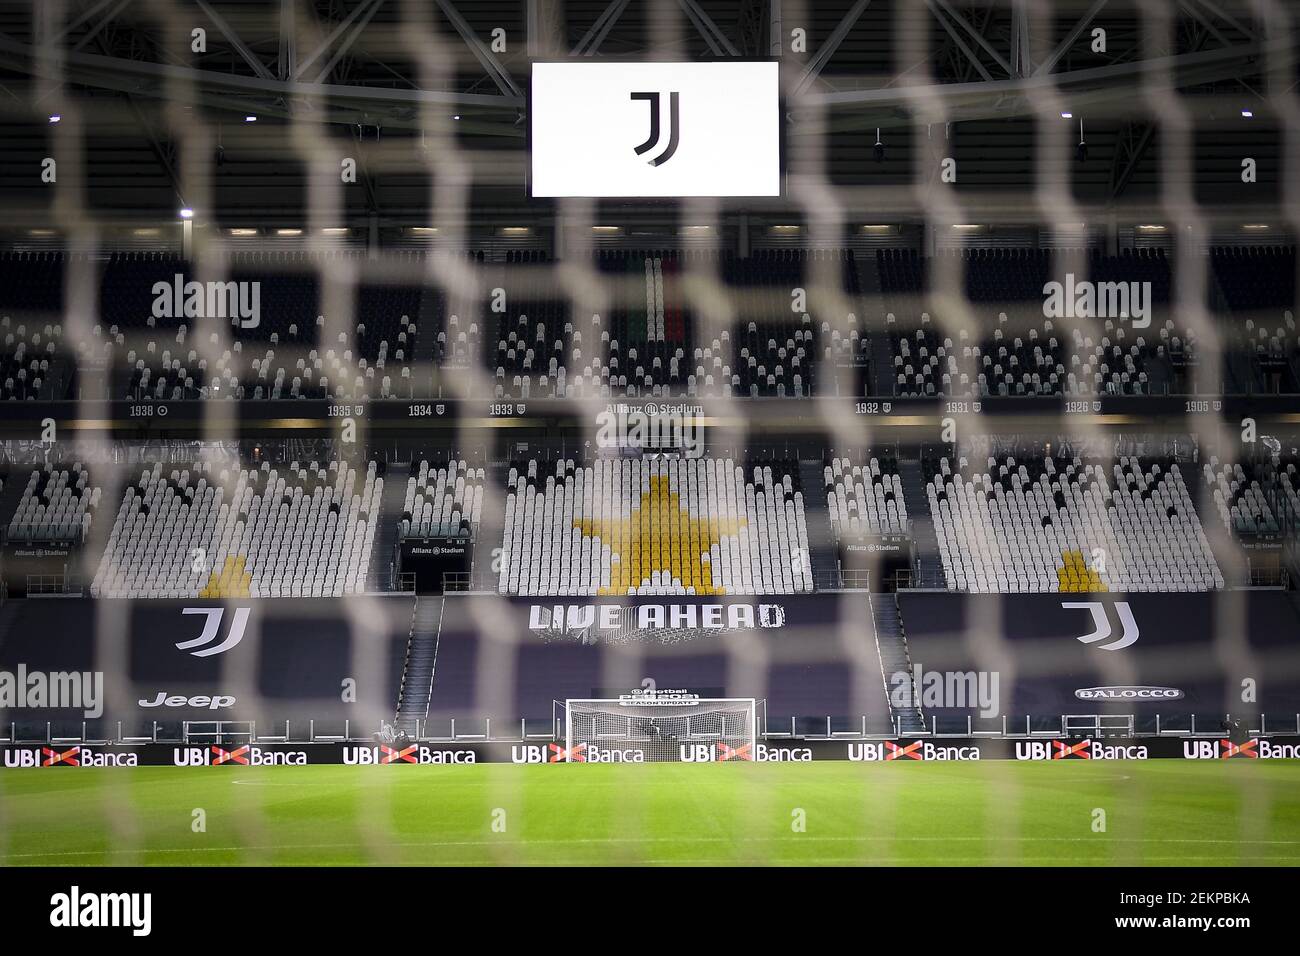 TURIN, ITALY - October 04, 2020: General view shows Allianz Stadium ahead the scheduled Serie A football match between Juventus FC and SSC Napoli. In all likelihood Juventus FC will be awarded a 3-0 victory by default since SSC Napoli didn't show up as they had been prevented from travelling to Turin by local health authorities (ASL) due to the possibility of a COVID-19 coronavirus outbreak in the squad. Also Juventus FC squad have gone into isolation after two staff members tested positive for COVID-19 coronavirus, however Juventus FC showed up at Allianz Stadium as normal as Serie A official Stock Photo